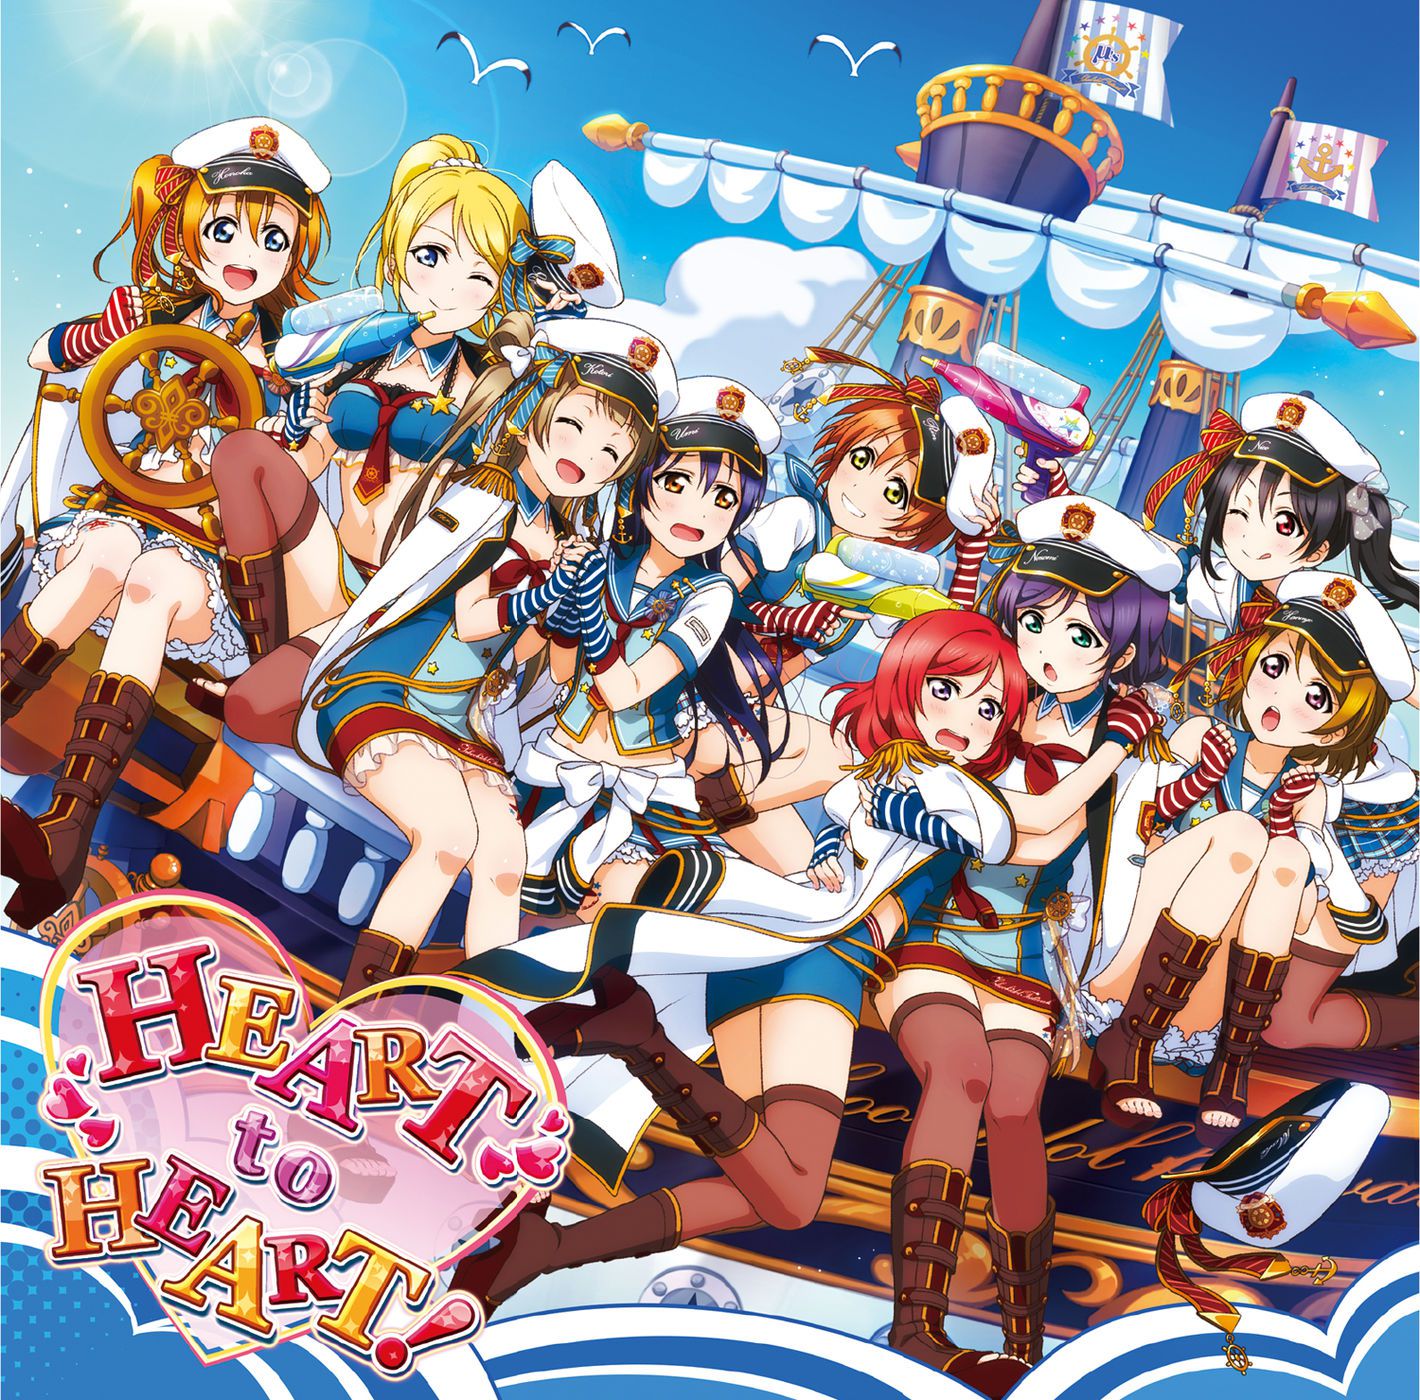 [Large image] "love live! ' The corner www nearly deflated this week and see the beautiful illustrations of high quality CD's 40